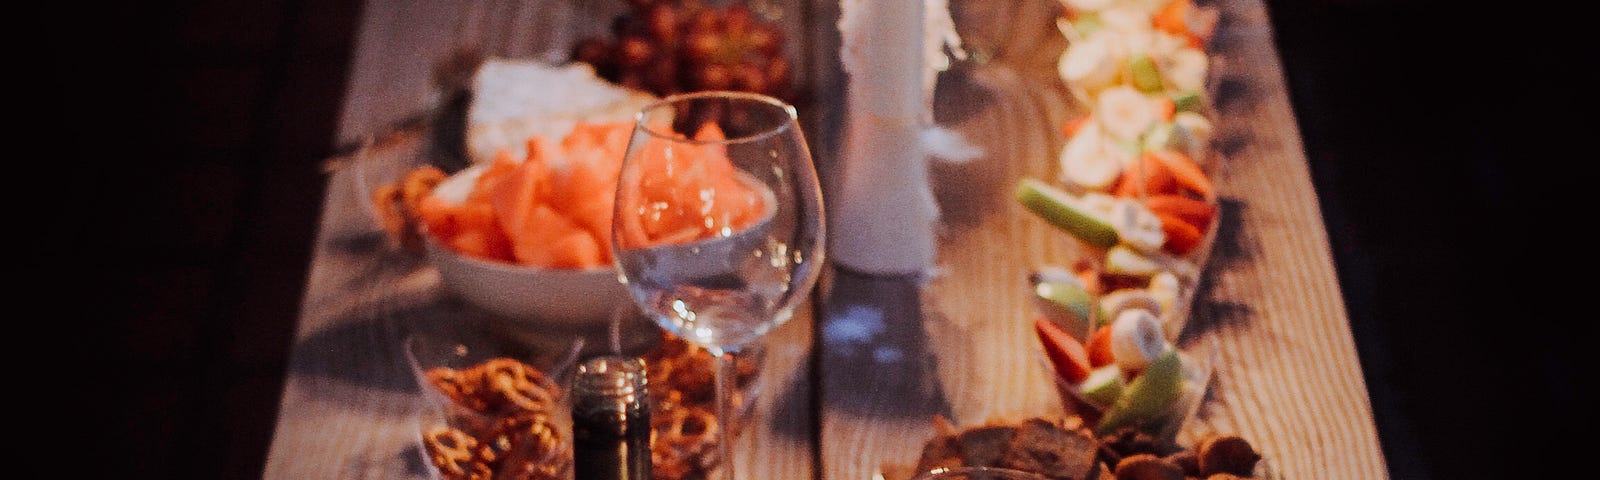 A long wooden board covered in food. A bottle of wine, full glasses, bowls of finger food. The lighting is dim, soft candles against a black background.